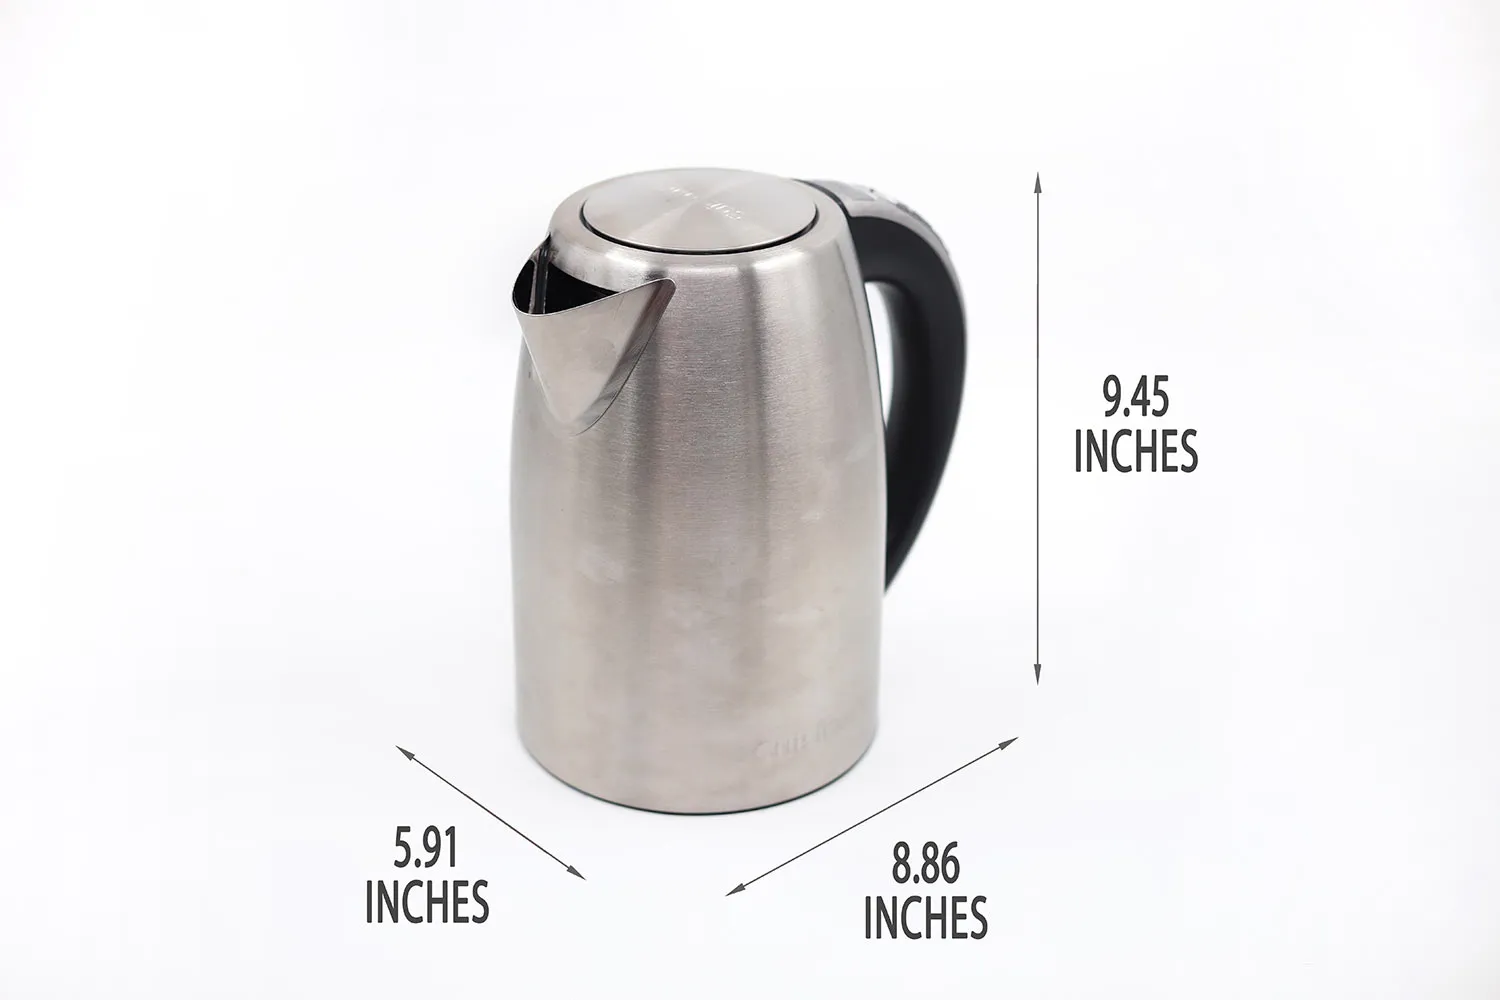 Cuisinart Electric Kettle CPK-17P1 In-depth Review